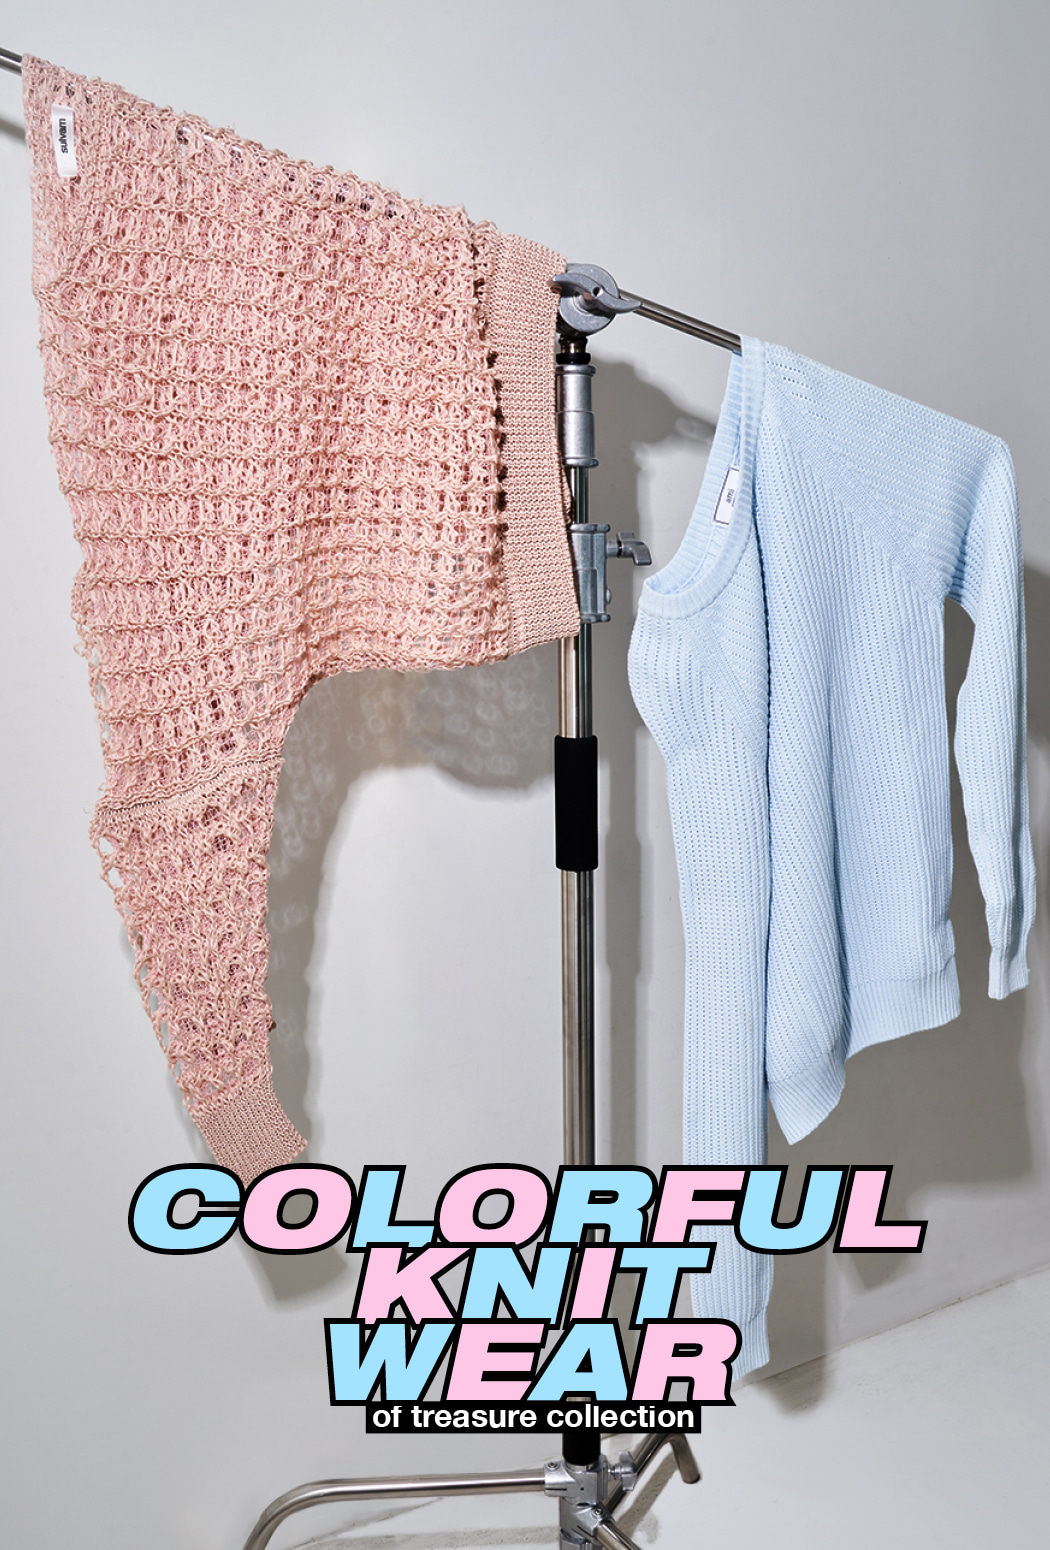 COLORFUL KNIT of treasure collection